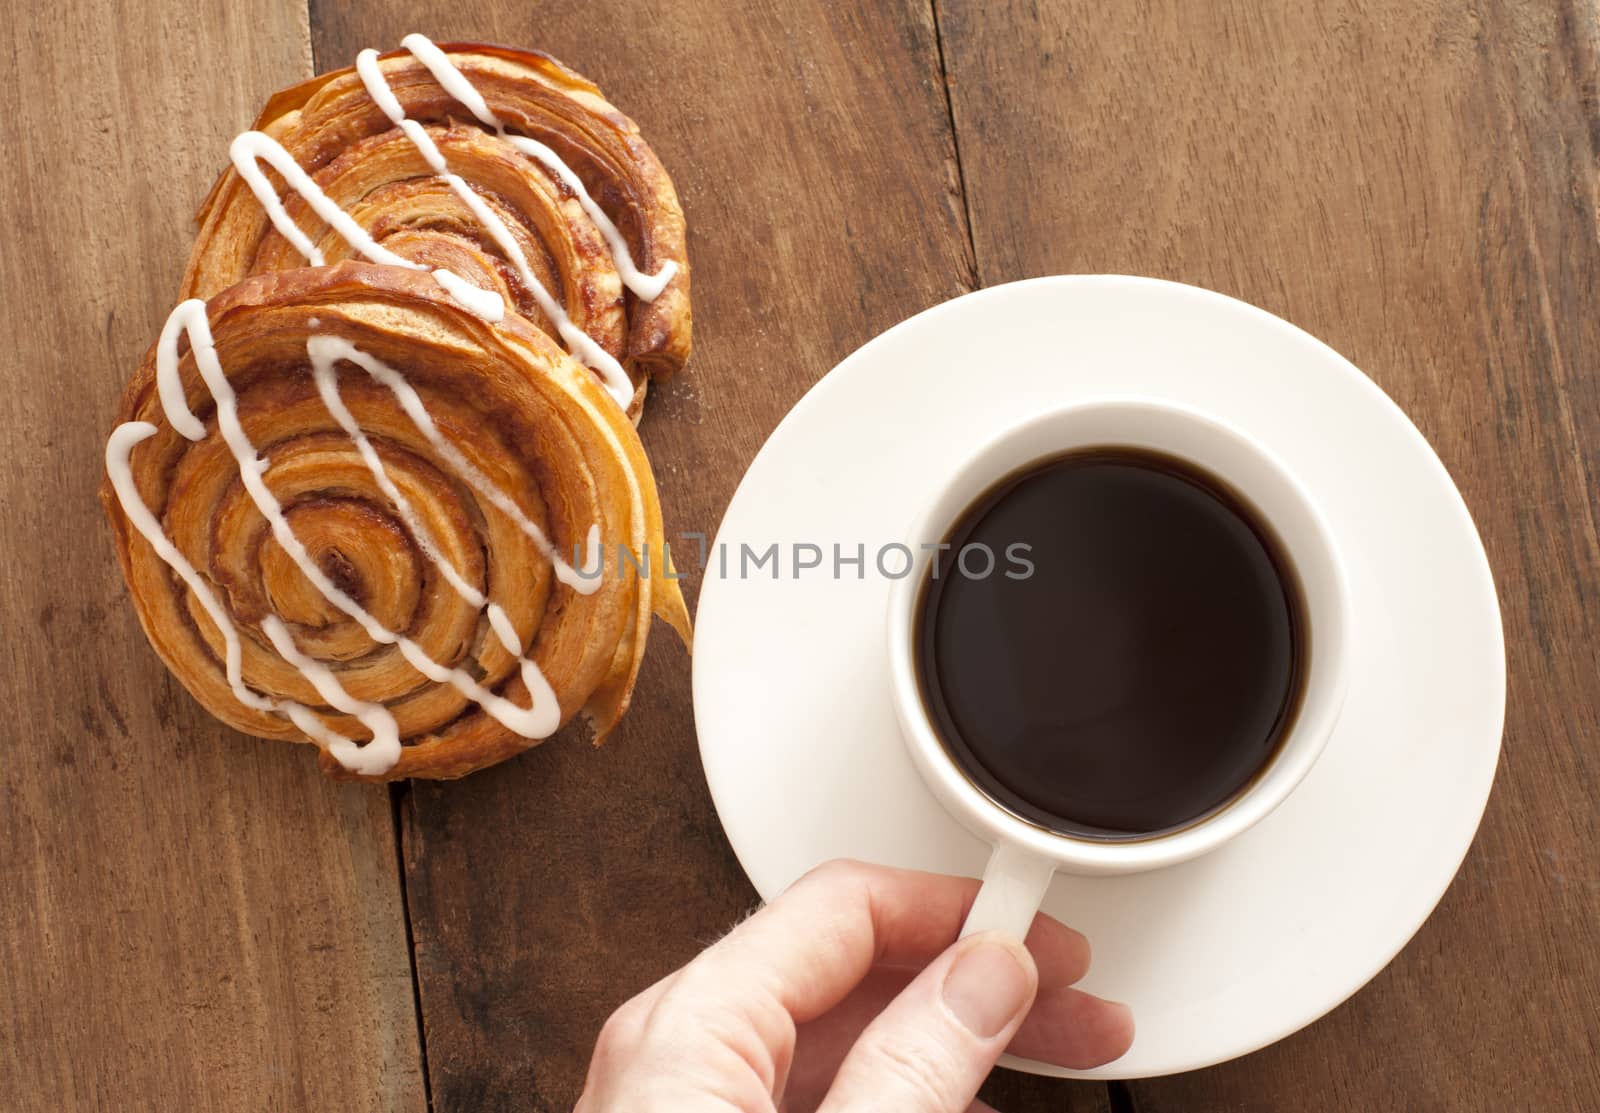 Man reaching for a cup and saucer of full roast espresso coffee with fresh Danish pastries for a refreshing coffee break, high angle view on wood